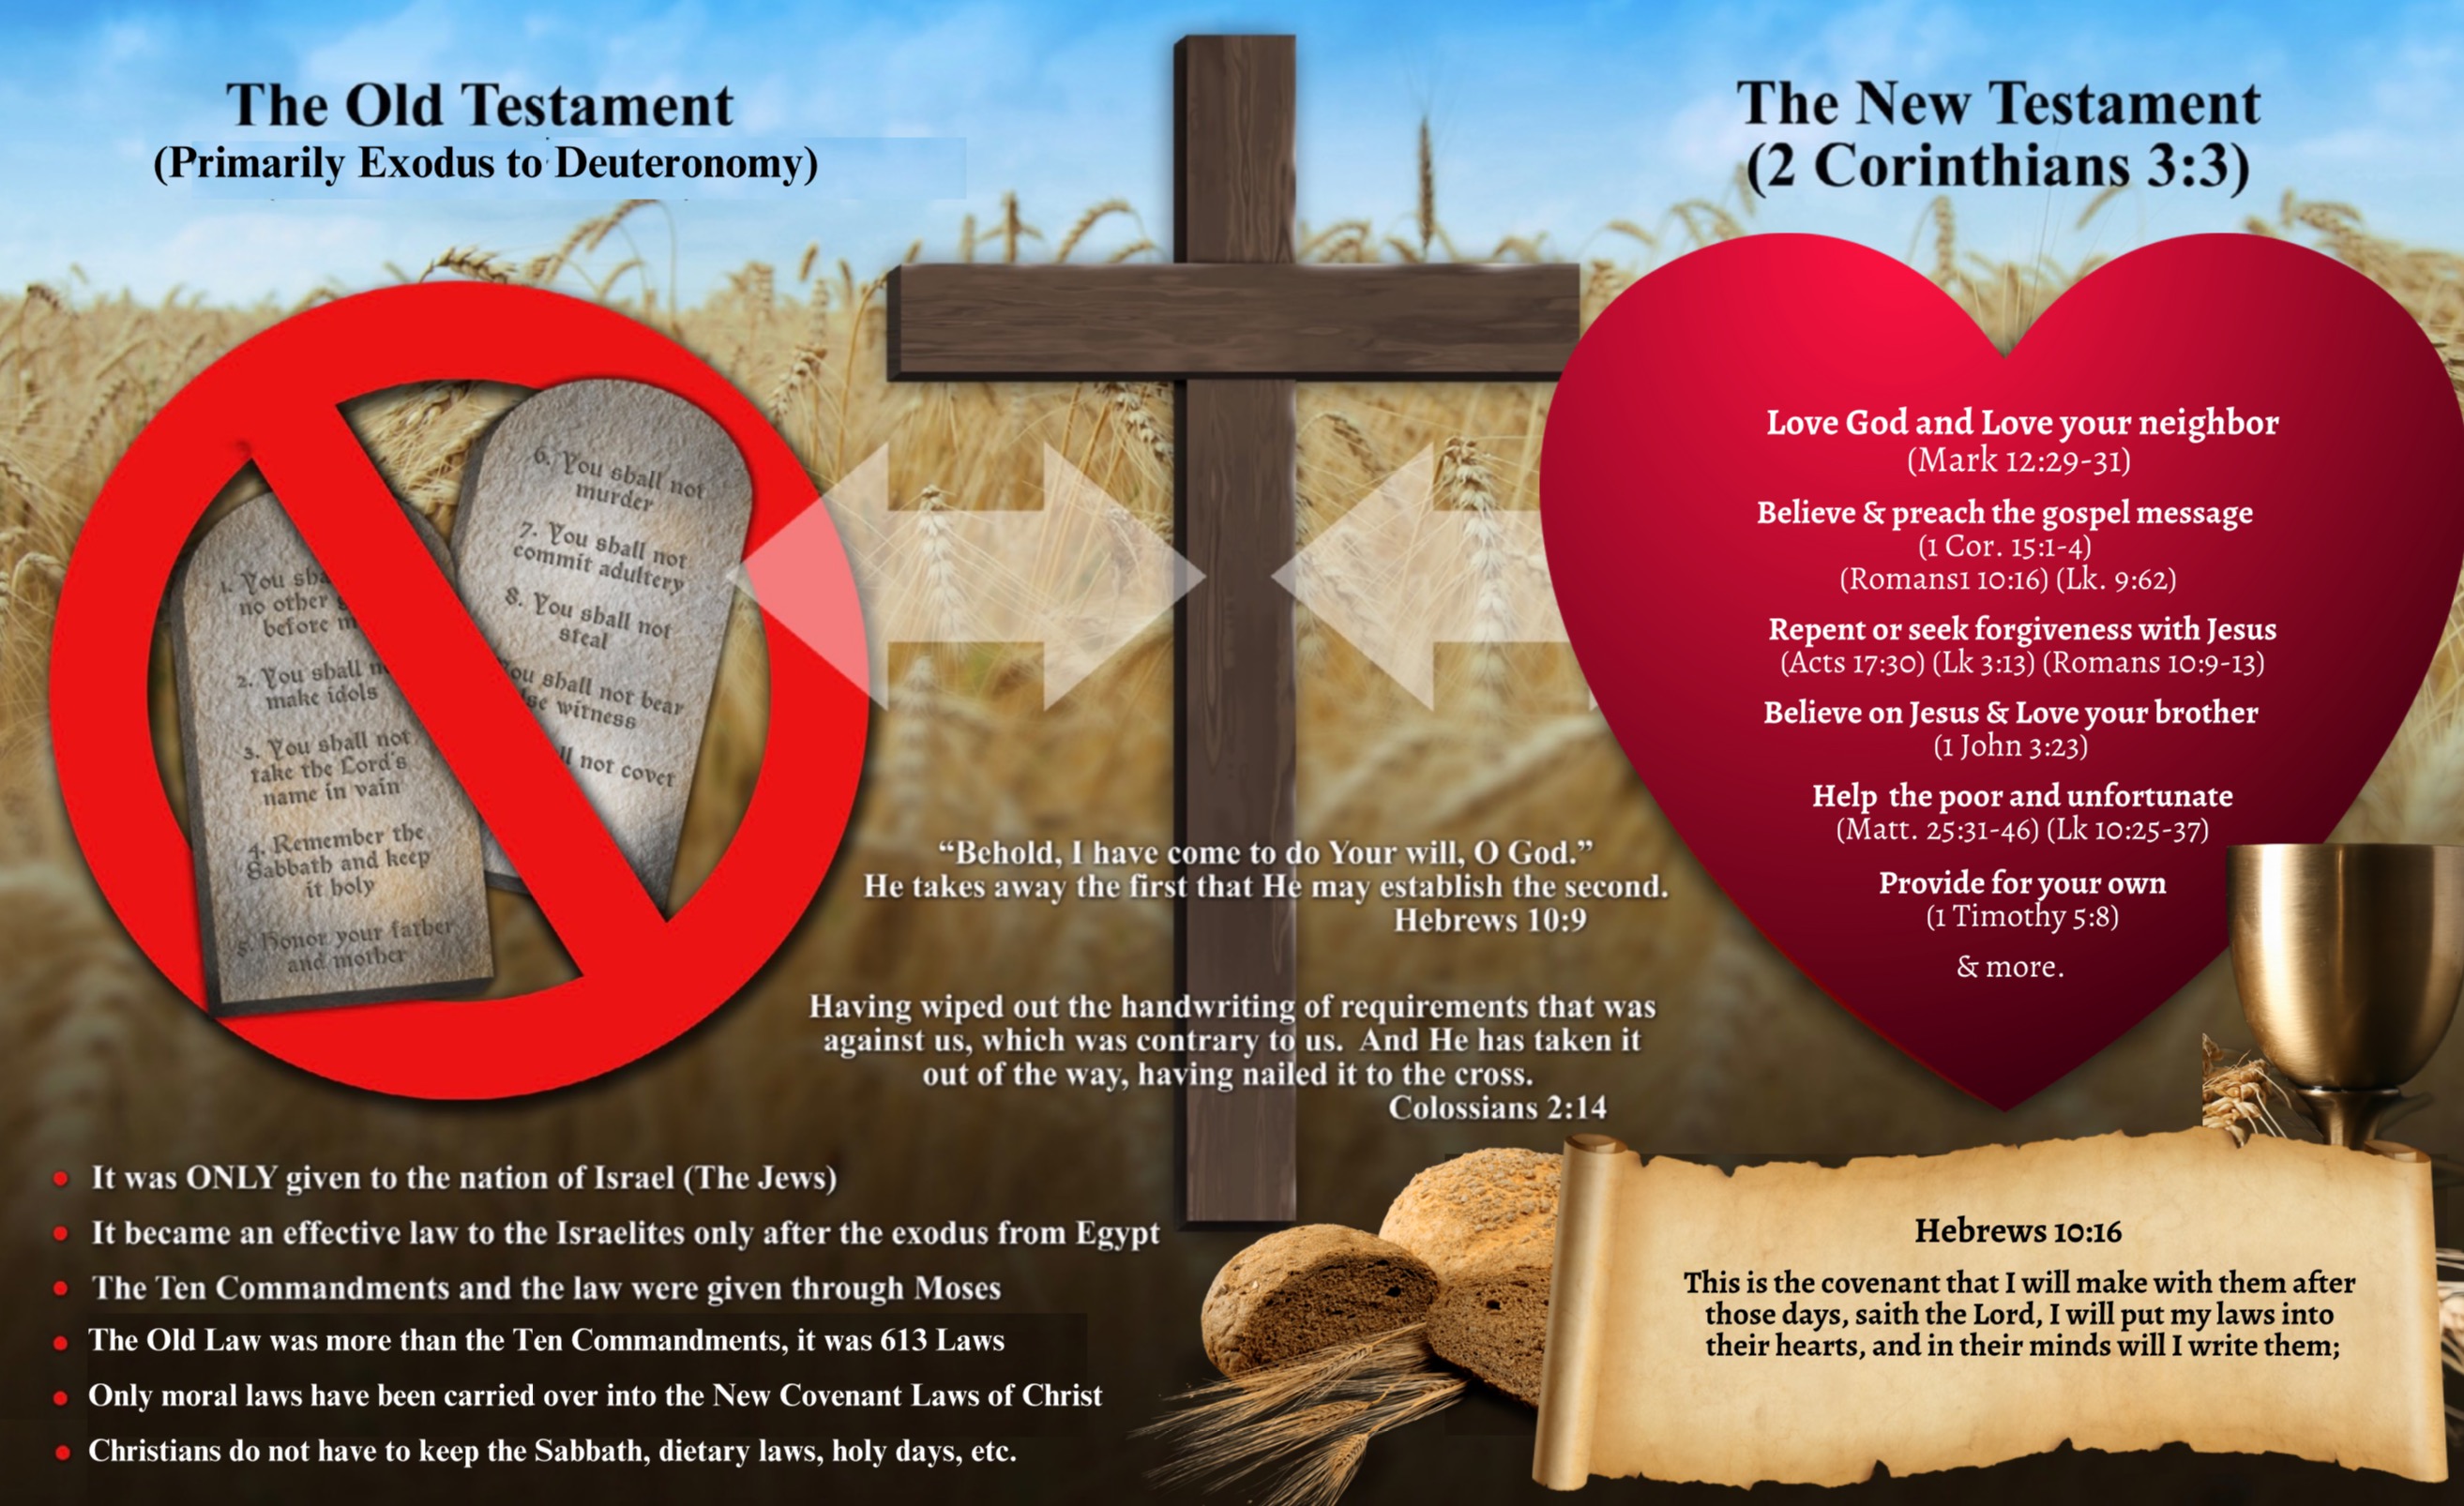 The New Covenant replaces the Old Covenant